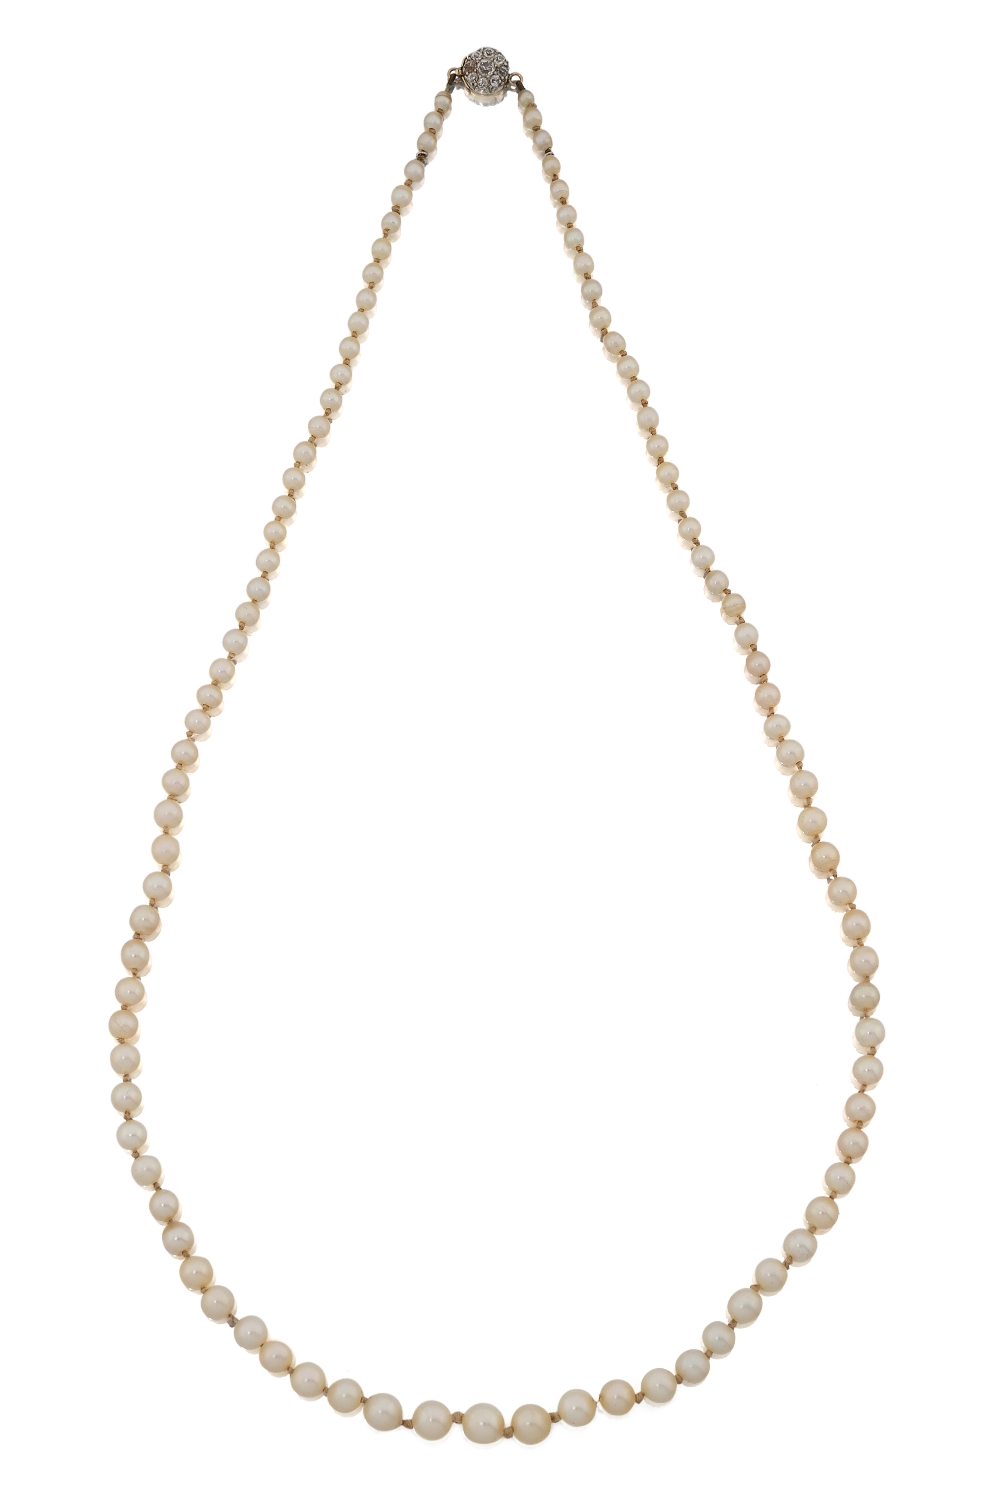 A pearl necklace, composed of a single row of graduated pearls, diameters ranging from 3.1mm to 5.